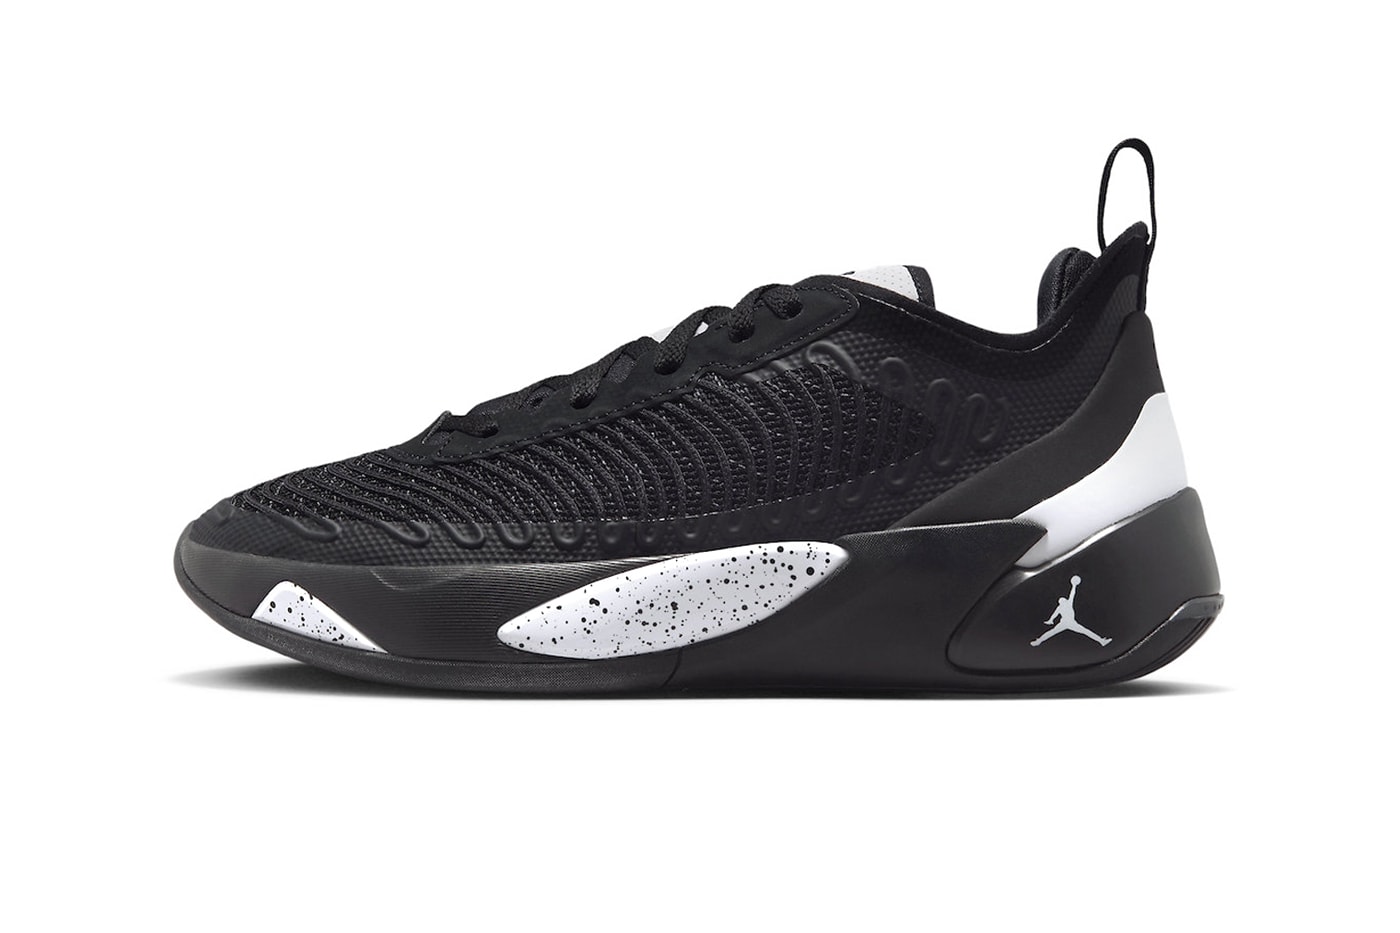 JORDAN LUKA 1 OREO Doncic first look black white dq7689 001 formula23 release info date price